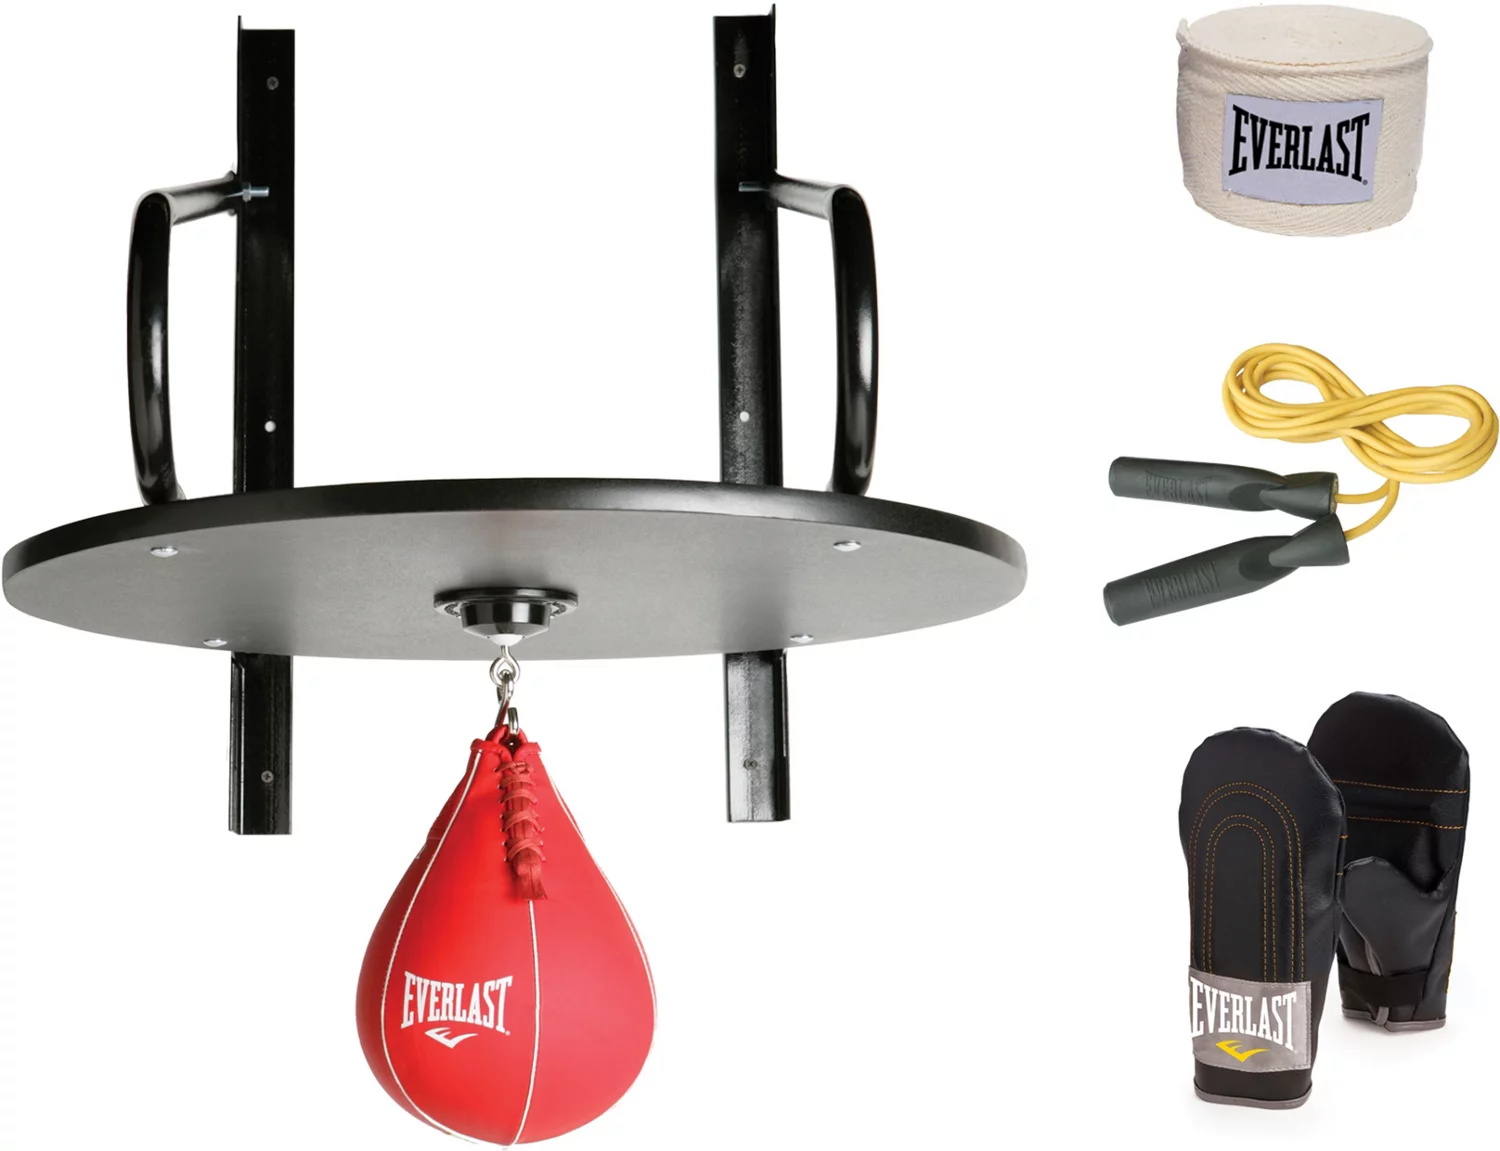 Heavy Bag Stand Weight Plates & The Bowflex Heavy-bag Stand Is Made Of Heavy Duty Steel ...